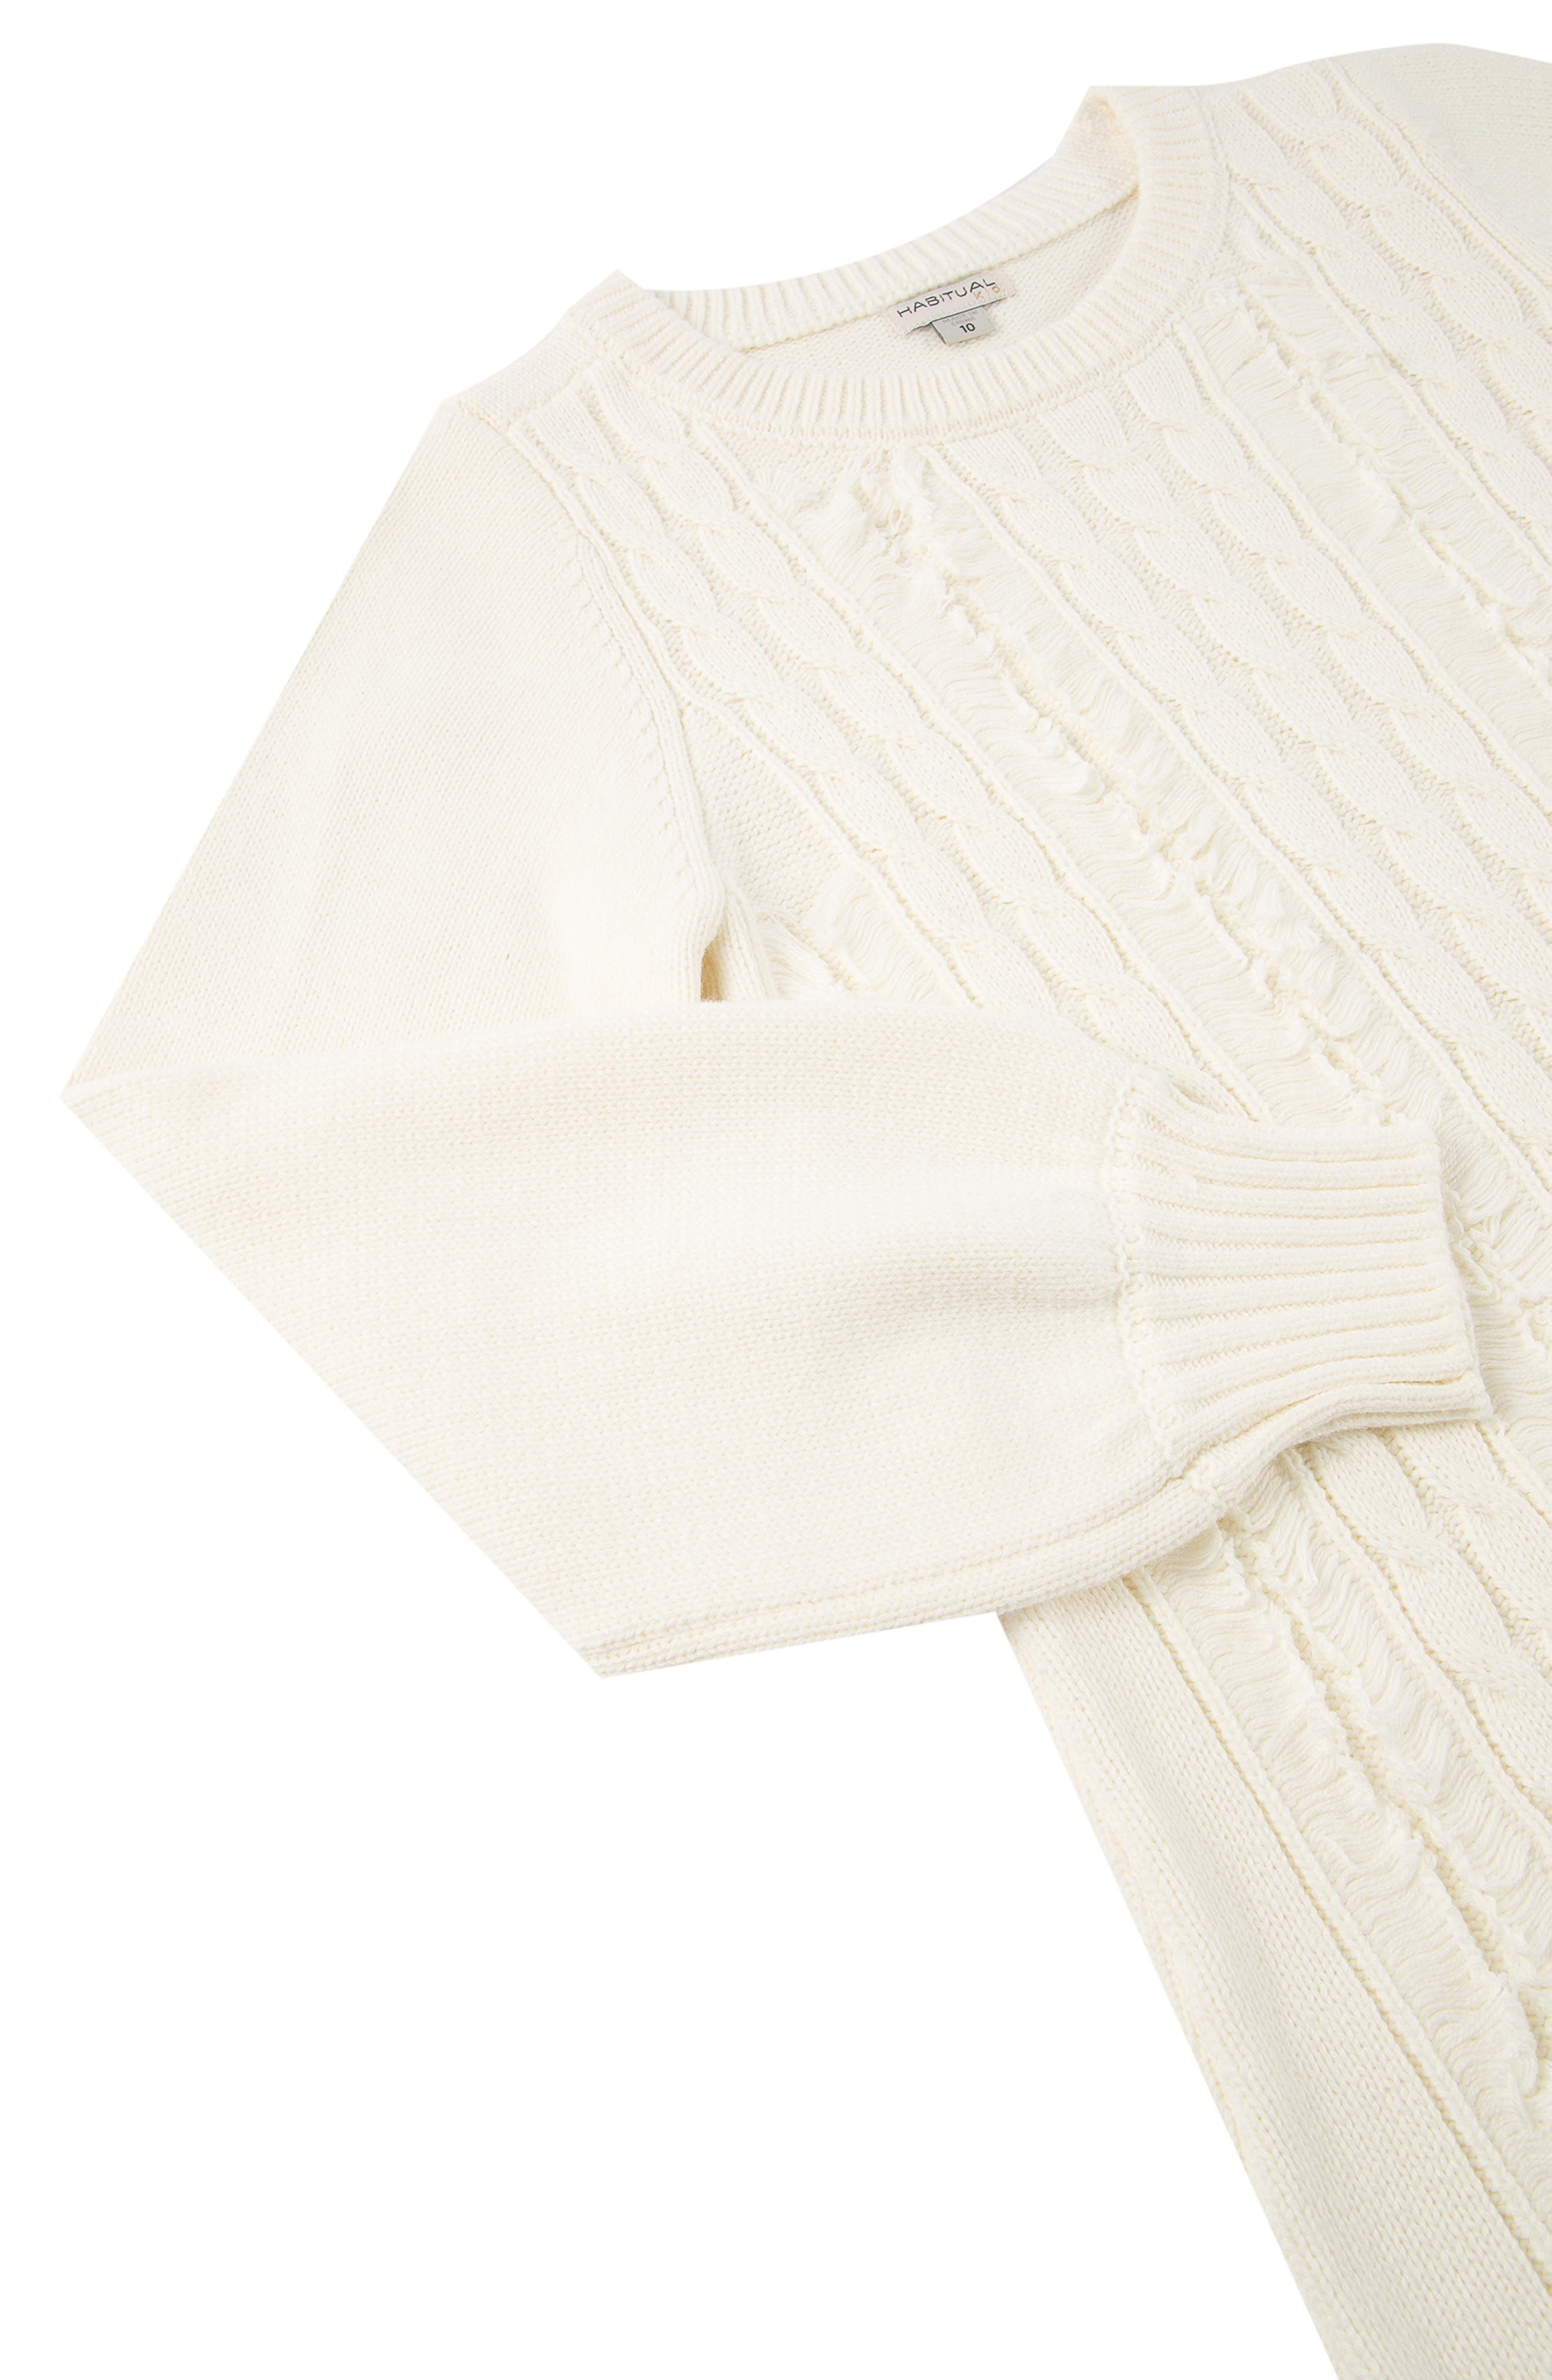 Nordstrom Clothing Dresses Knitted Dresses Kids Cable Knit Long Sleeve Cotton Blend Sweater Dress in Off-White at Nordstrom 